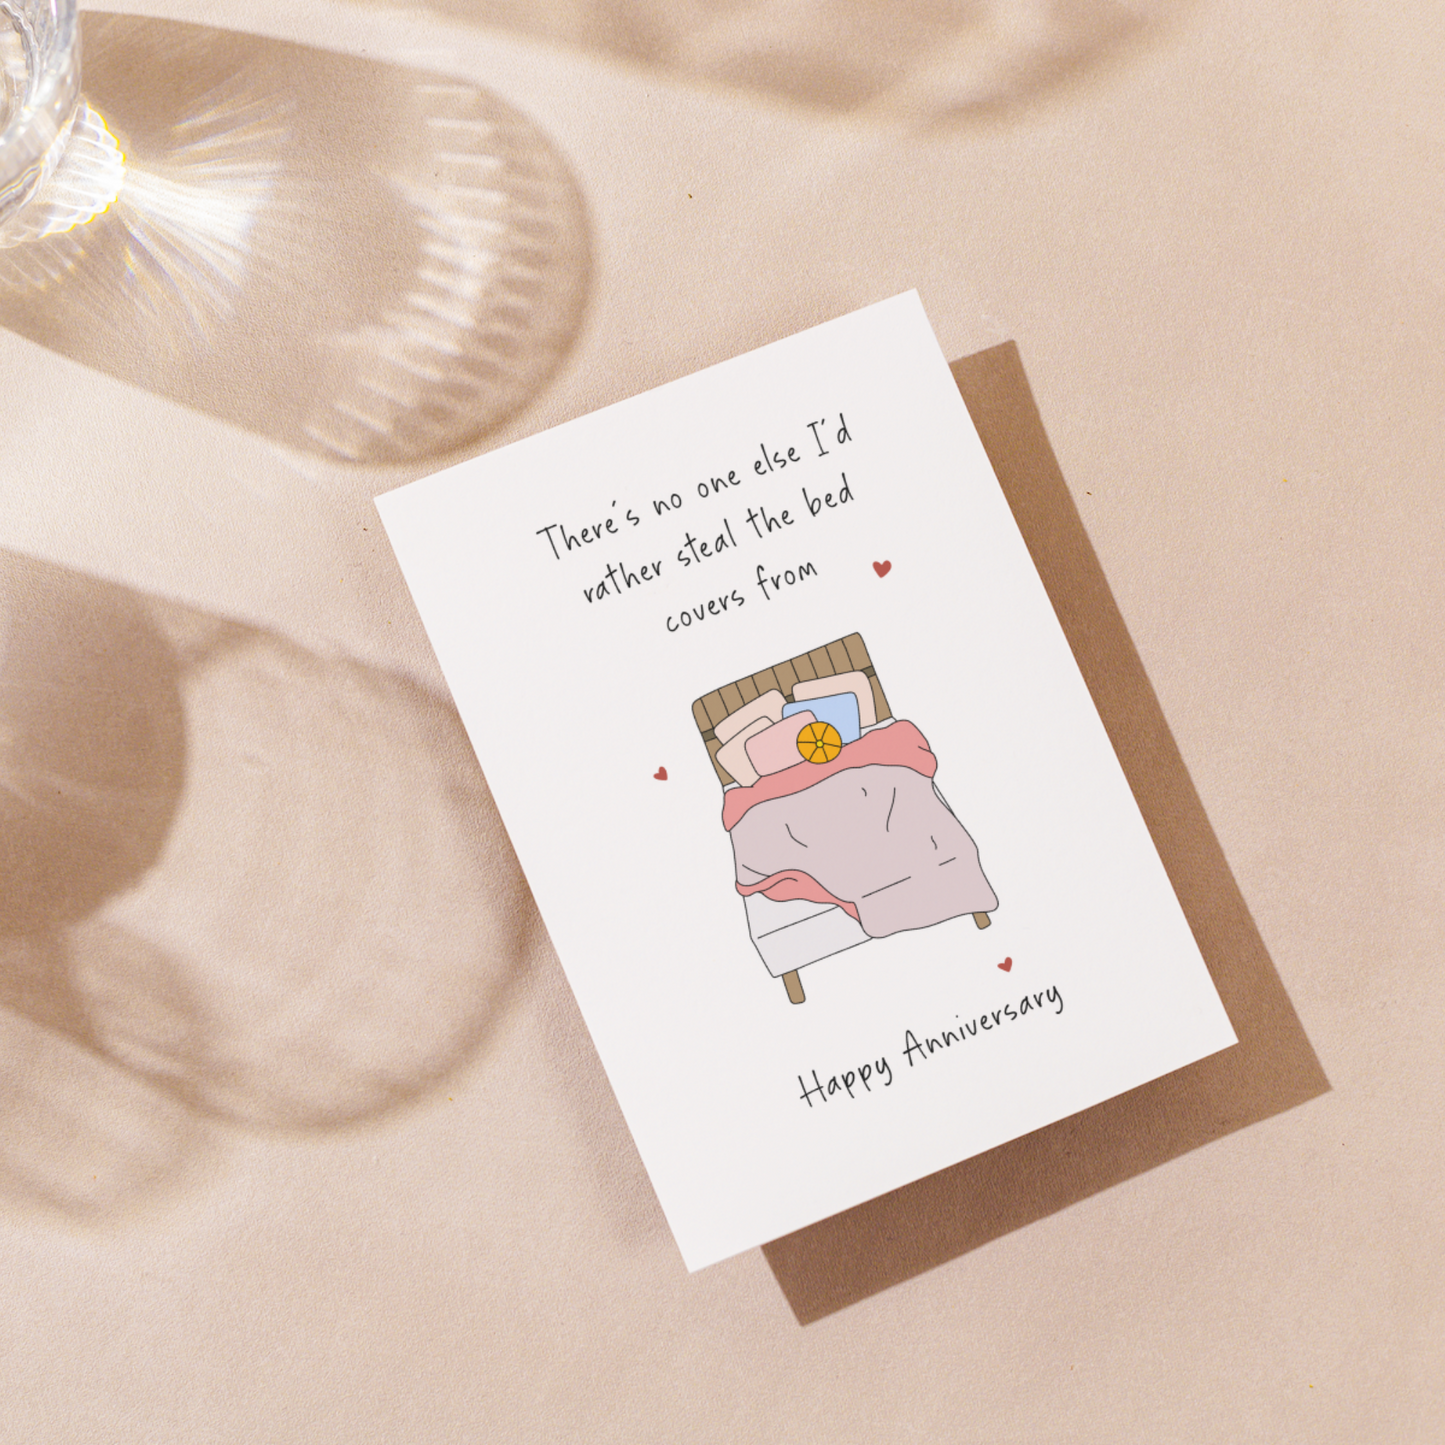 Funny Valentine's Card - No One I'd Rather Steal The Bed Covers From